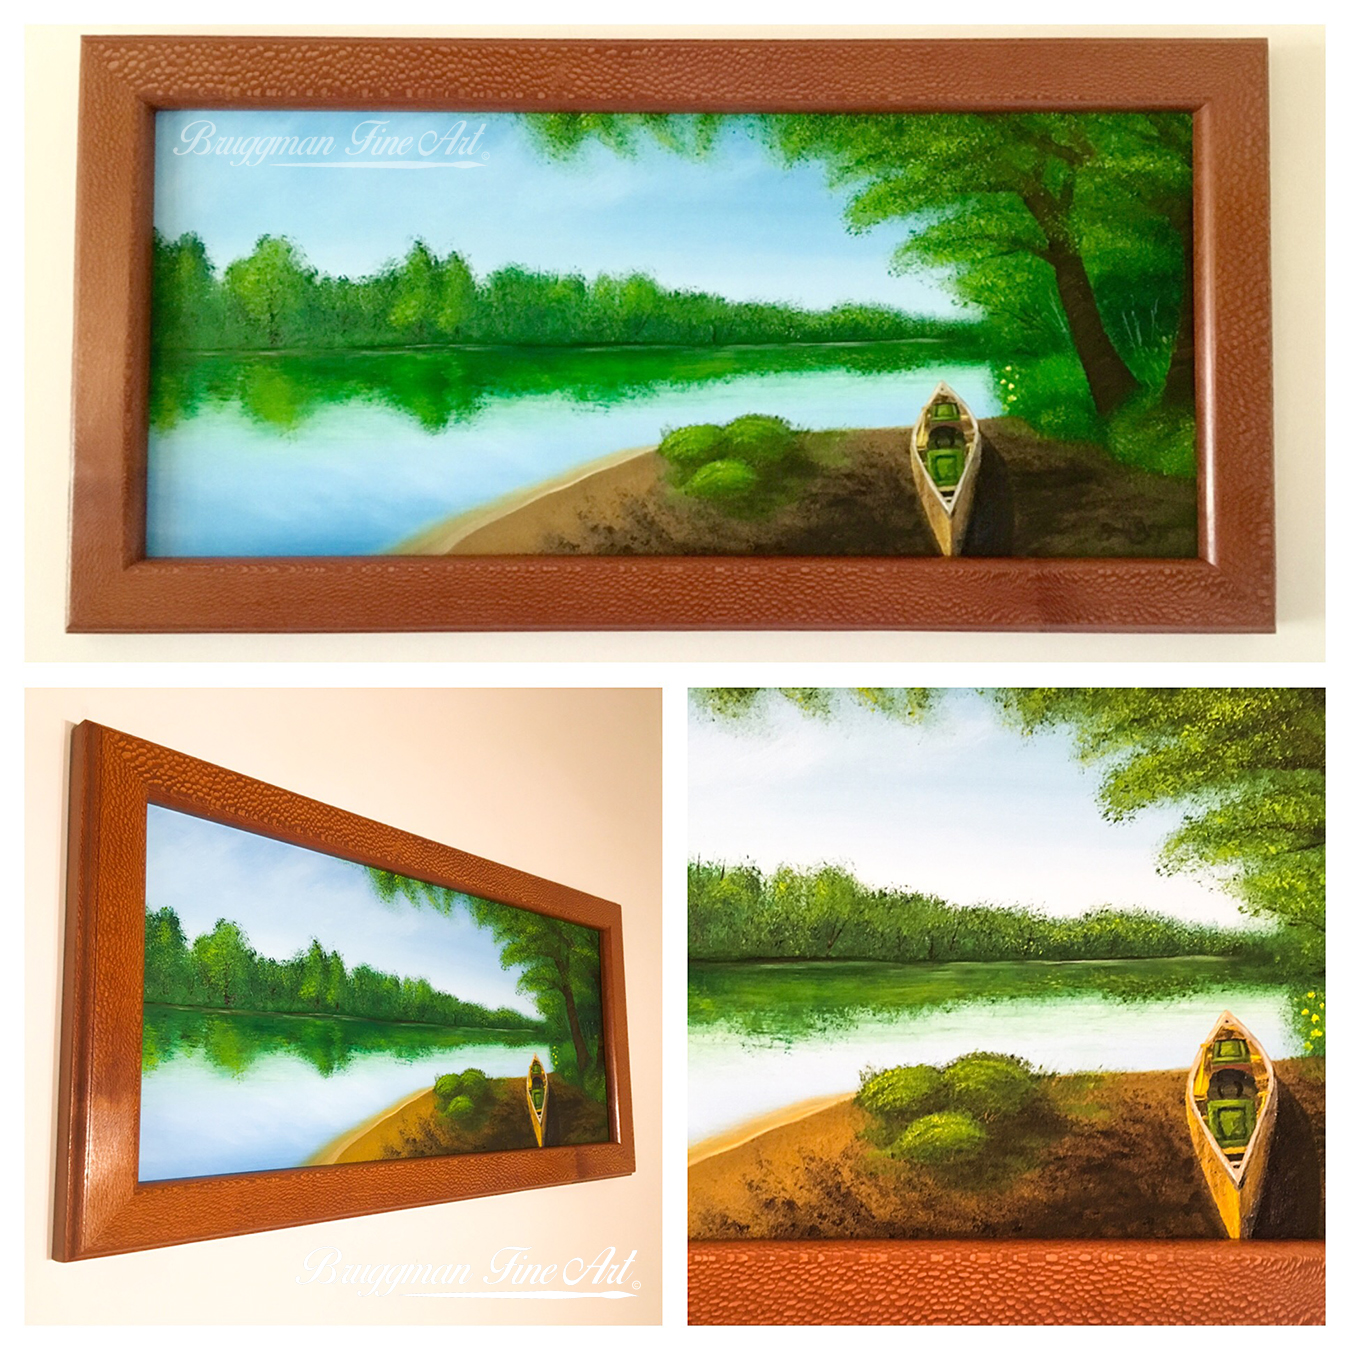 Canoe on the River Original Oil Painting Framed in Lace Wood by Artist Brandi Bruggman